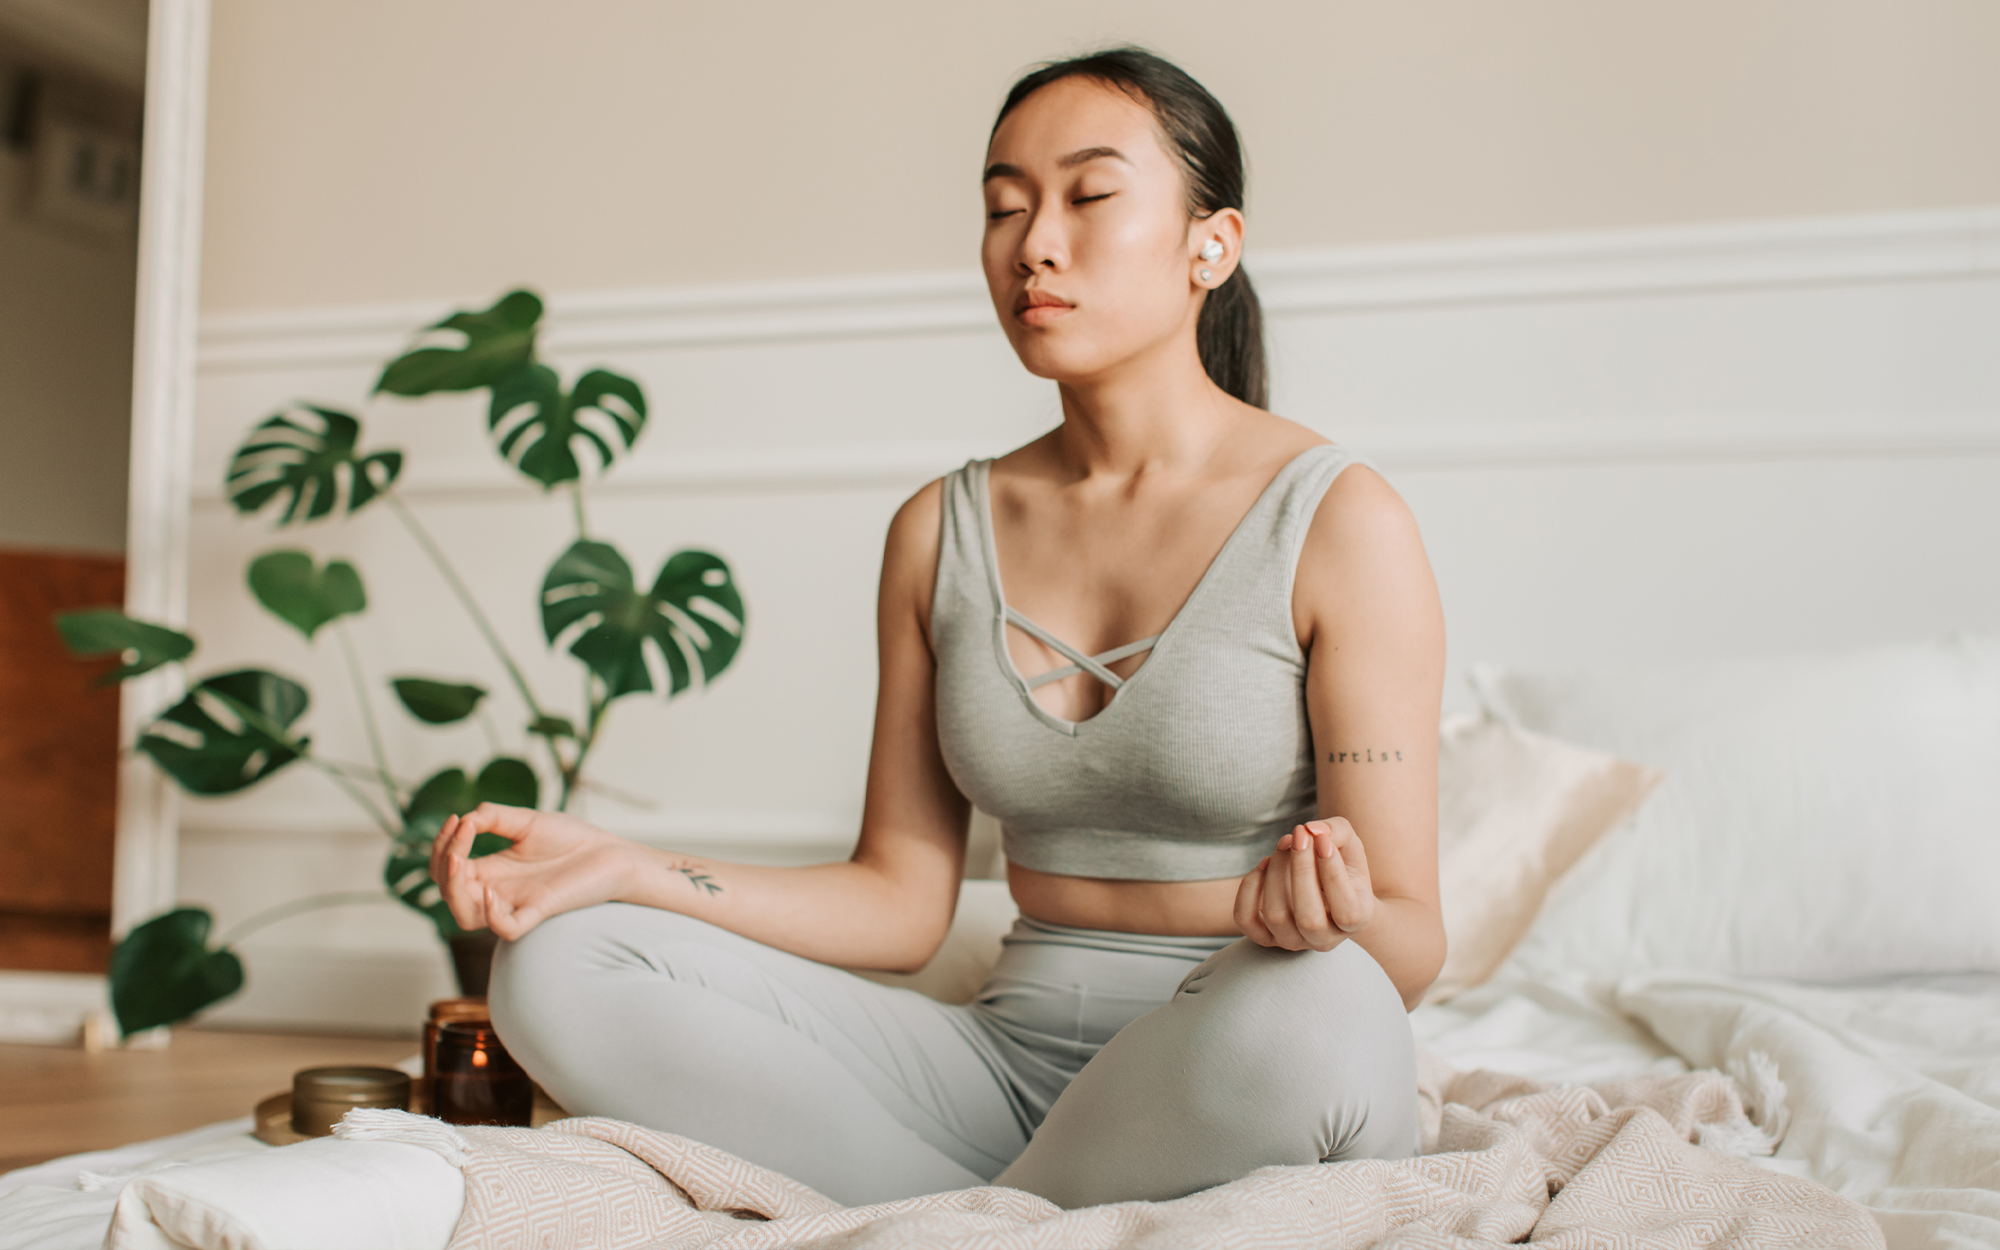 FOUR (AND A HALF) SCIENTIFIC REASONS WHY MEDITATION IS GOOD FOR YOU